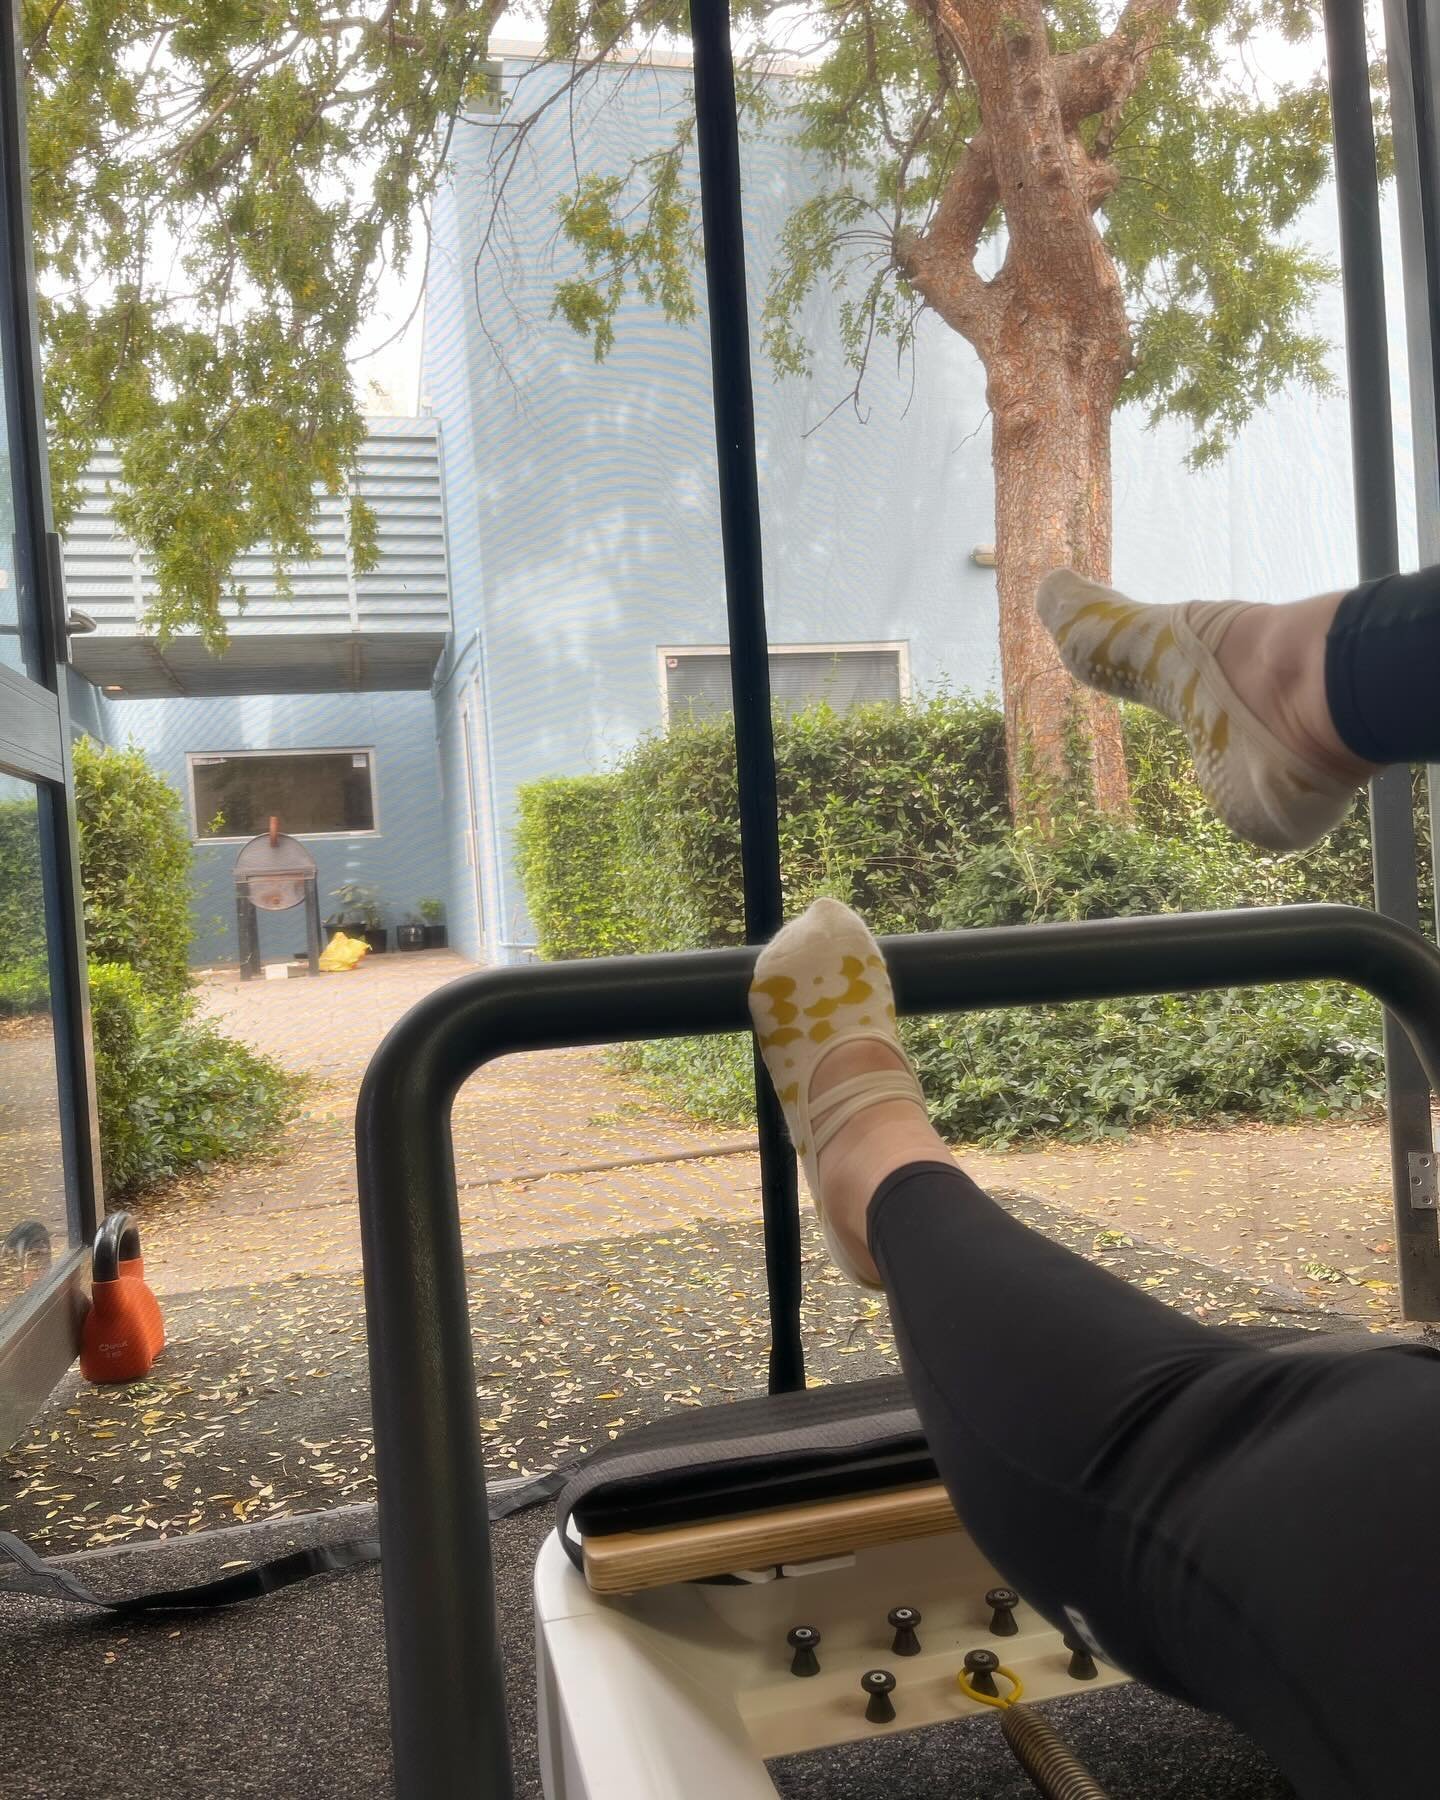 🍂Beautiful autumns day for Pilates🍂

Enjoy the fresh autumn air this week during your reformer Pilates class. 

#dubbopilates #reformerdubbo #beautifuloutside